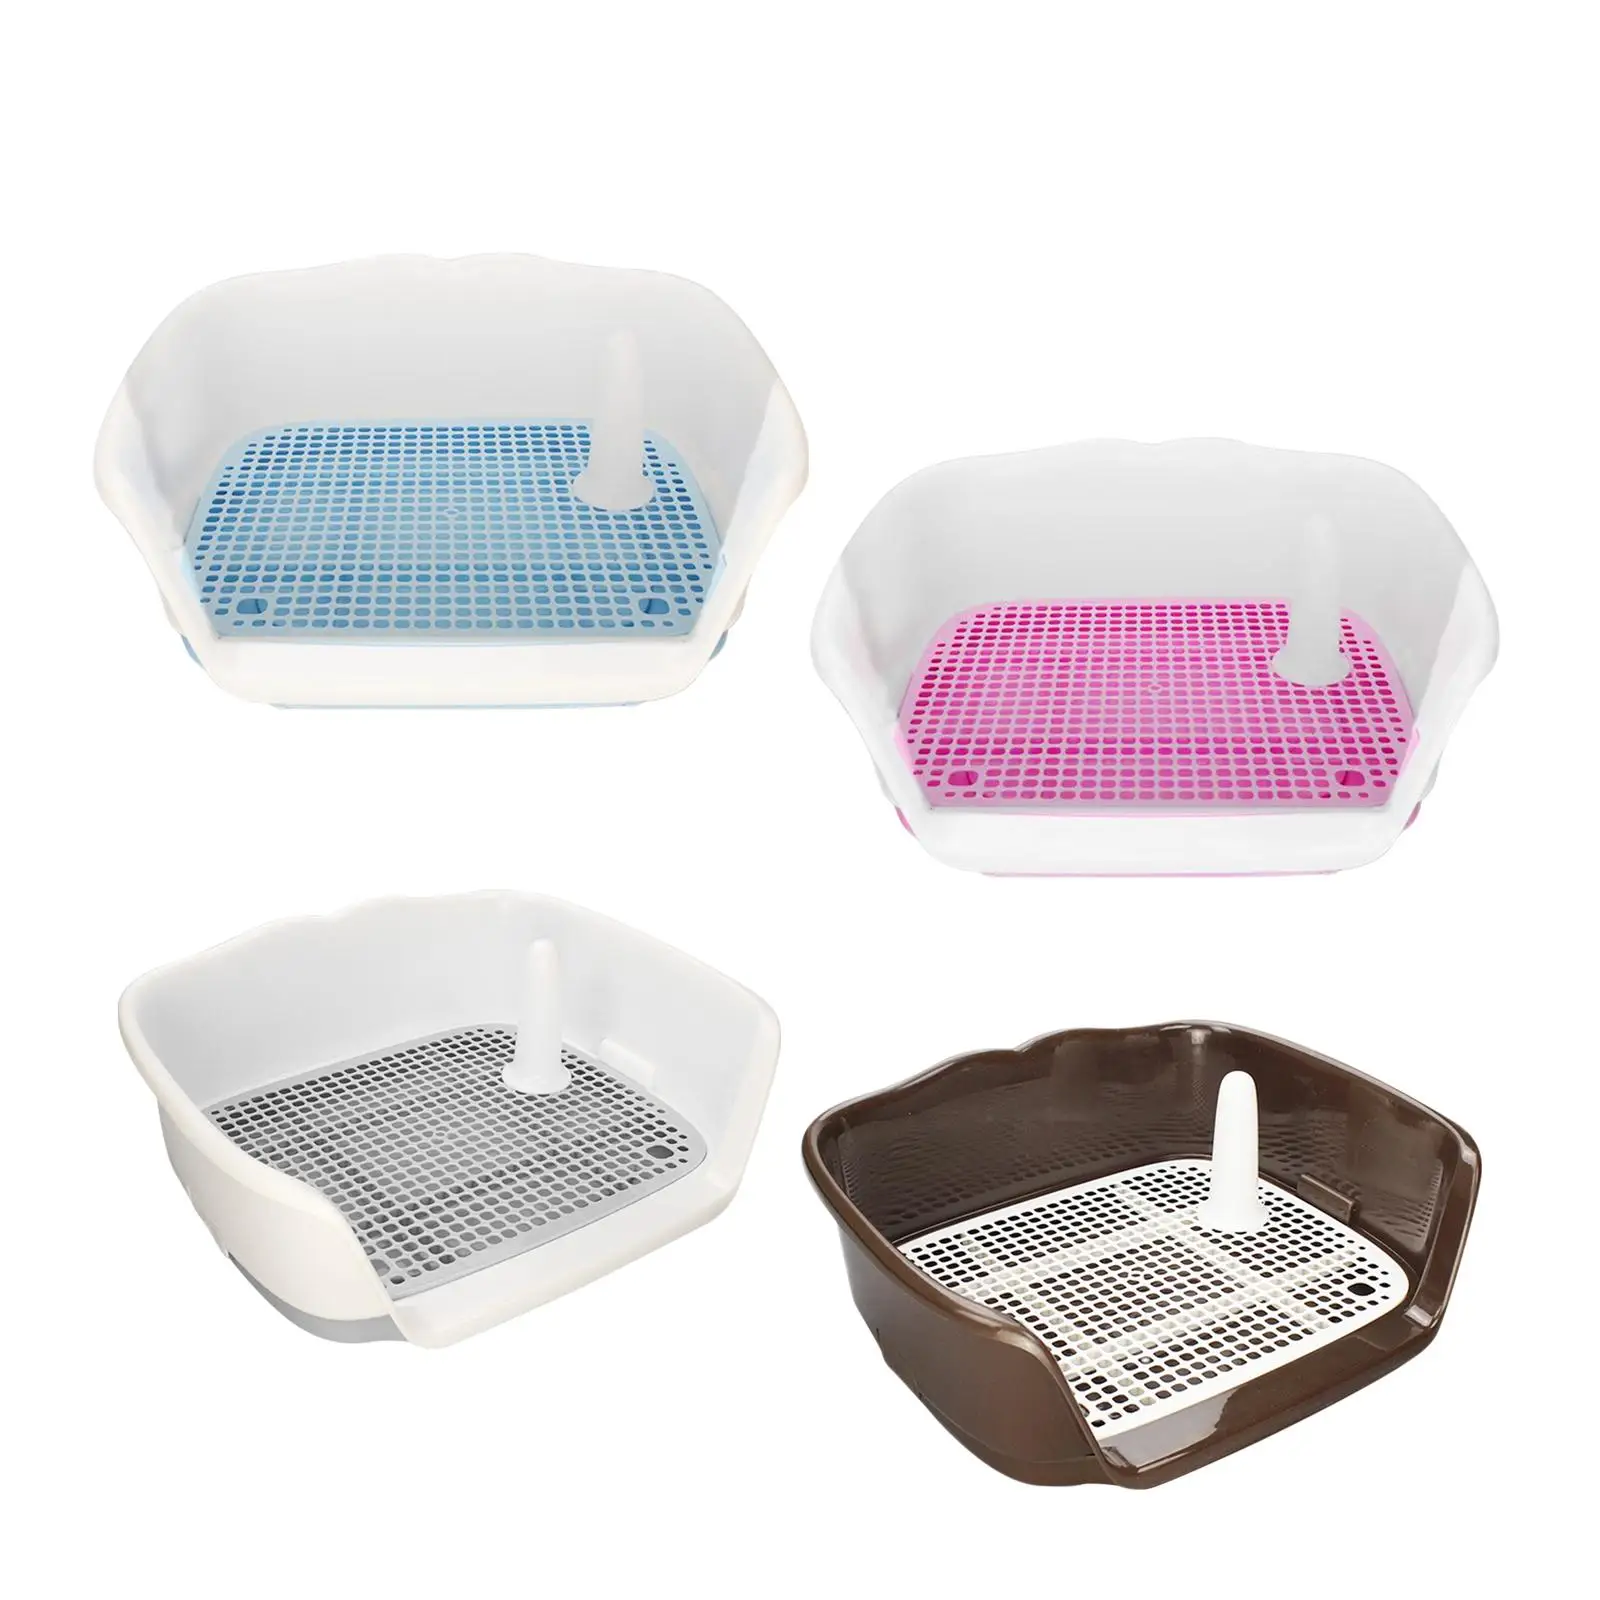 Indoor Dog Potty Tray for Small and Medium Dogs Mesh Dog Toilet for Cats Hamster